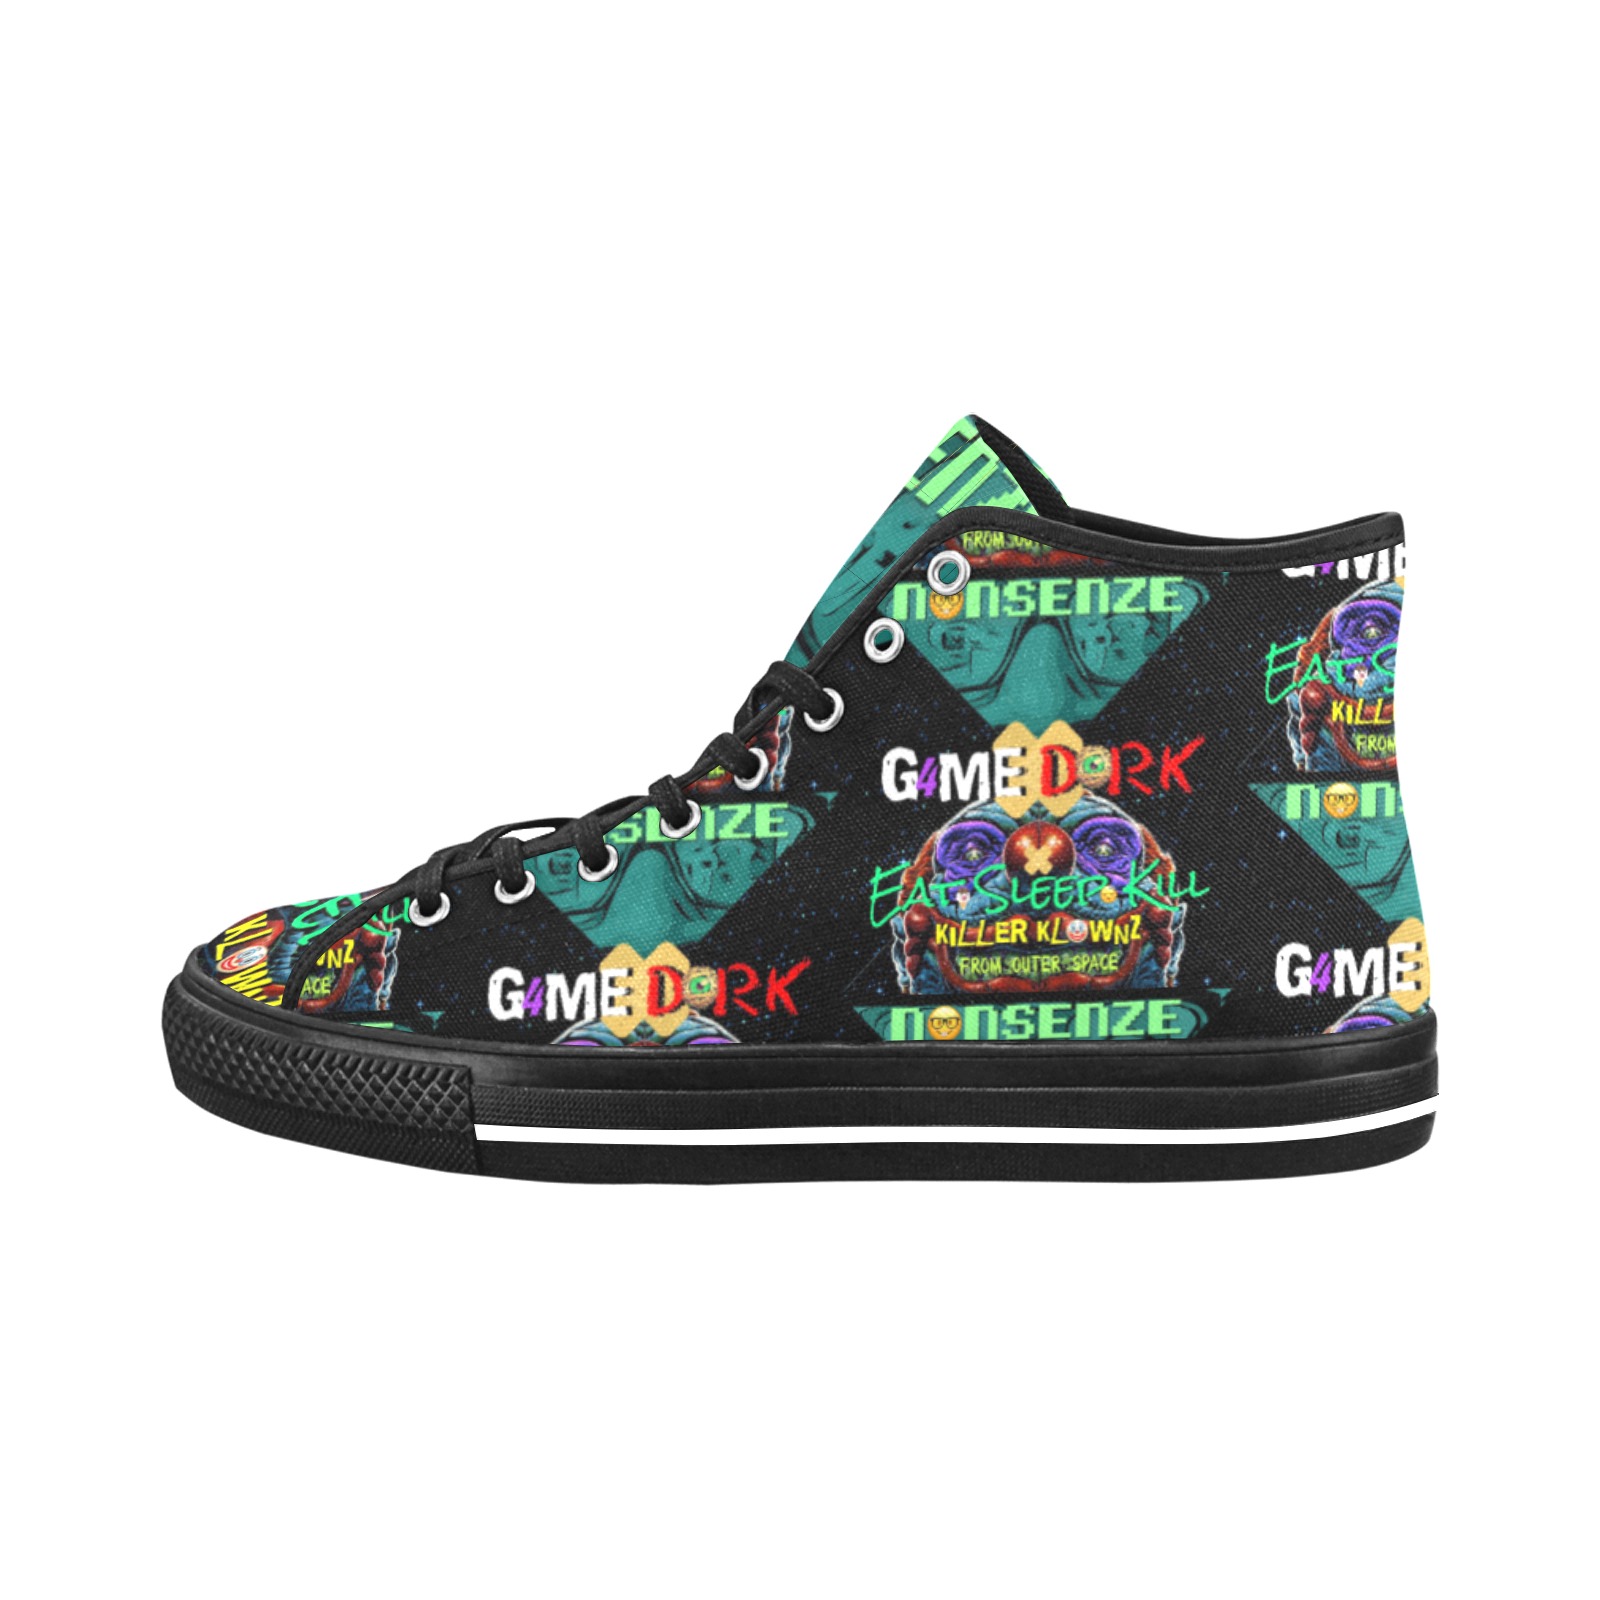 Eat Sleep Kill Killer Klownz From Outer Space Kicks Vancouver H Women's Canvas Shoes (1013-1)